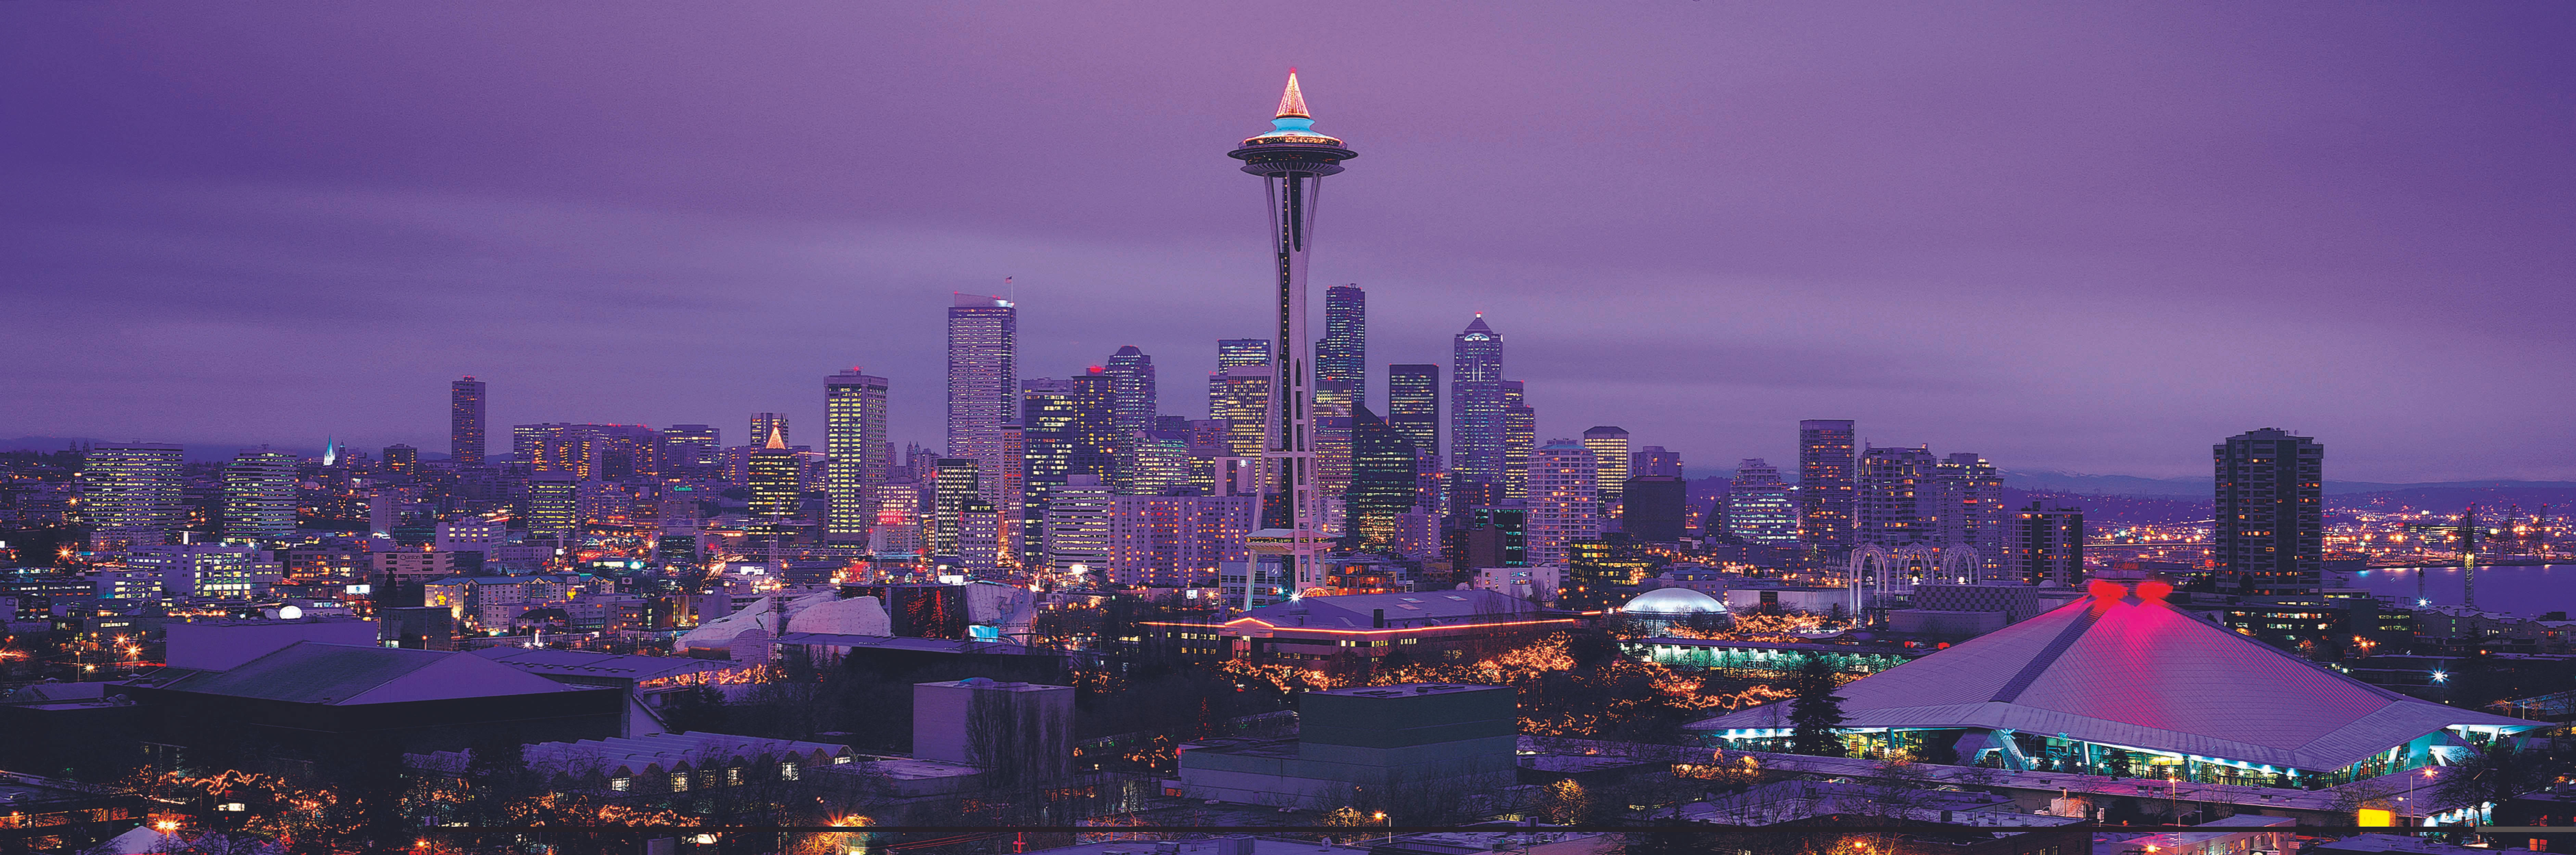 Seattle from Above Wallpaper